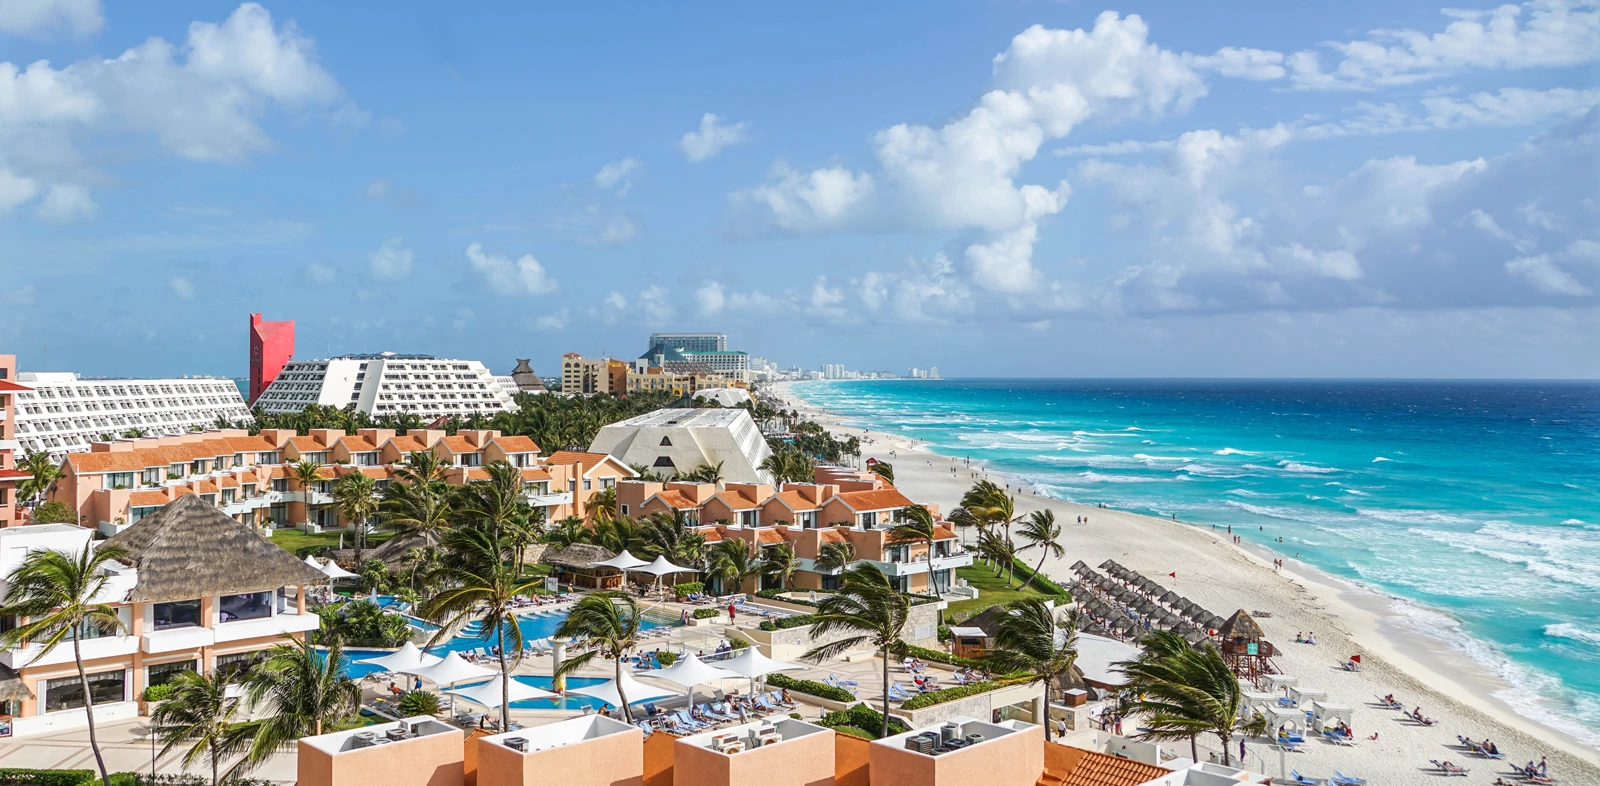 A view over a large resort in Cancun, Mexico, on the sandy shoreline on a clear sunny day